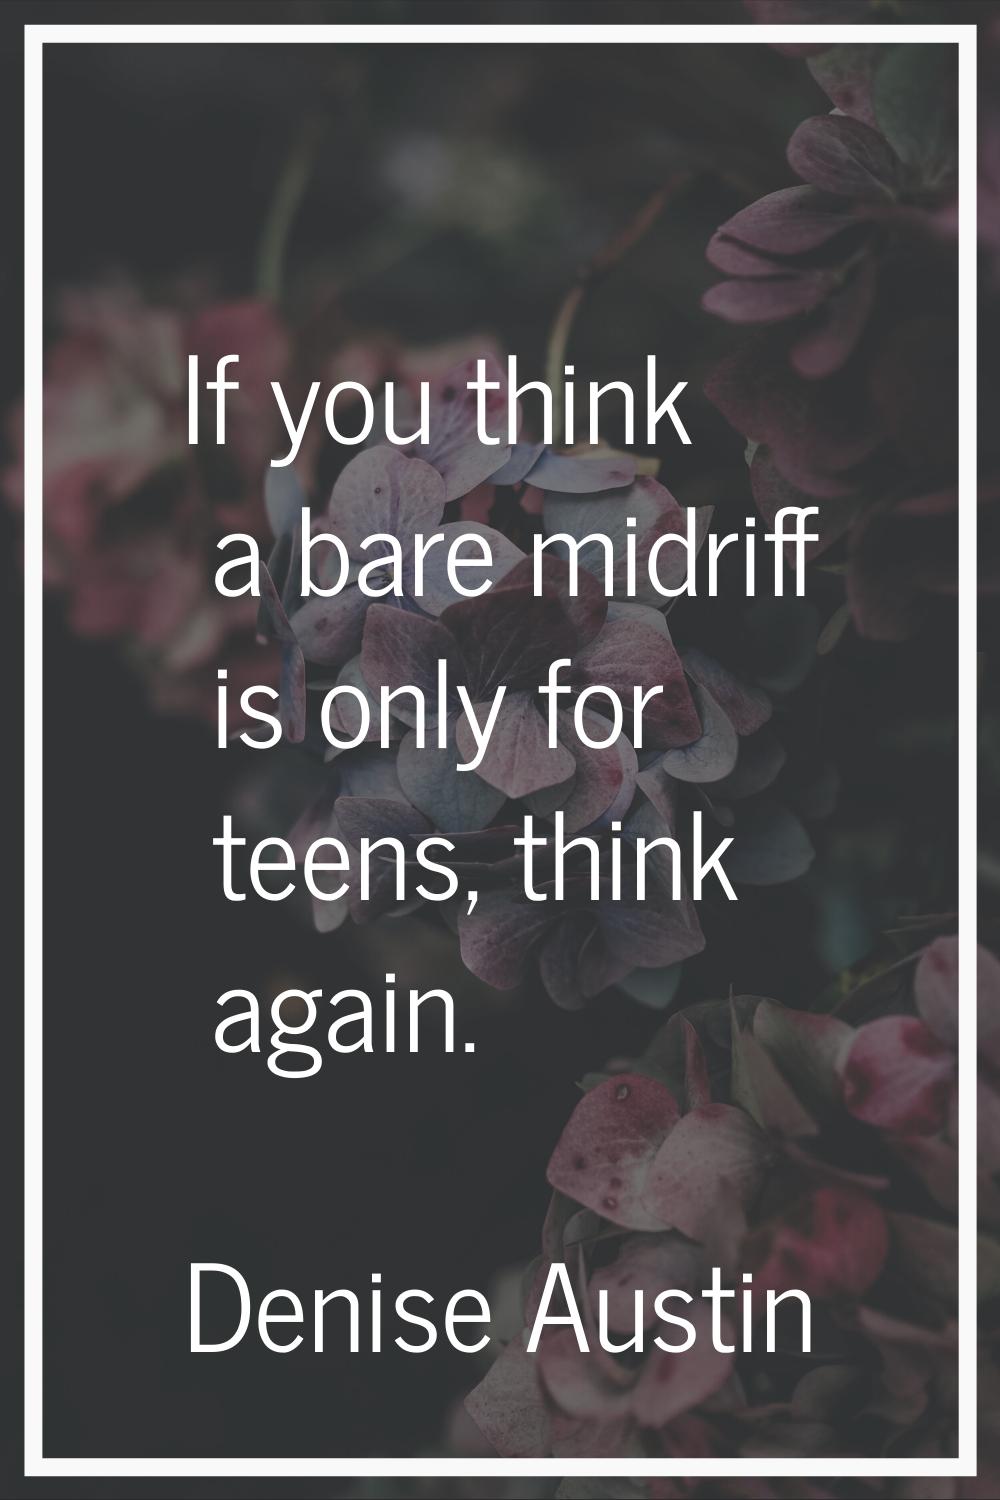 If you think a bare midriff is only for teens, think again.